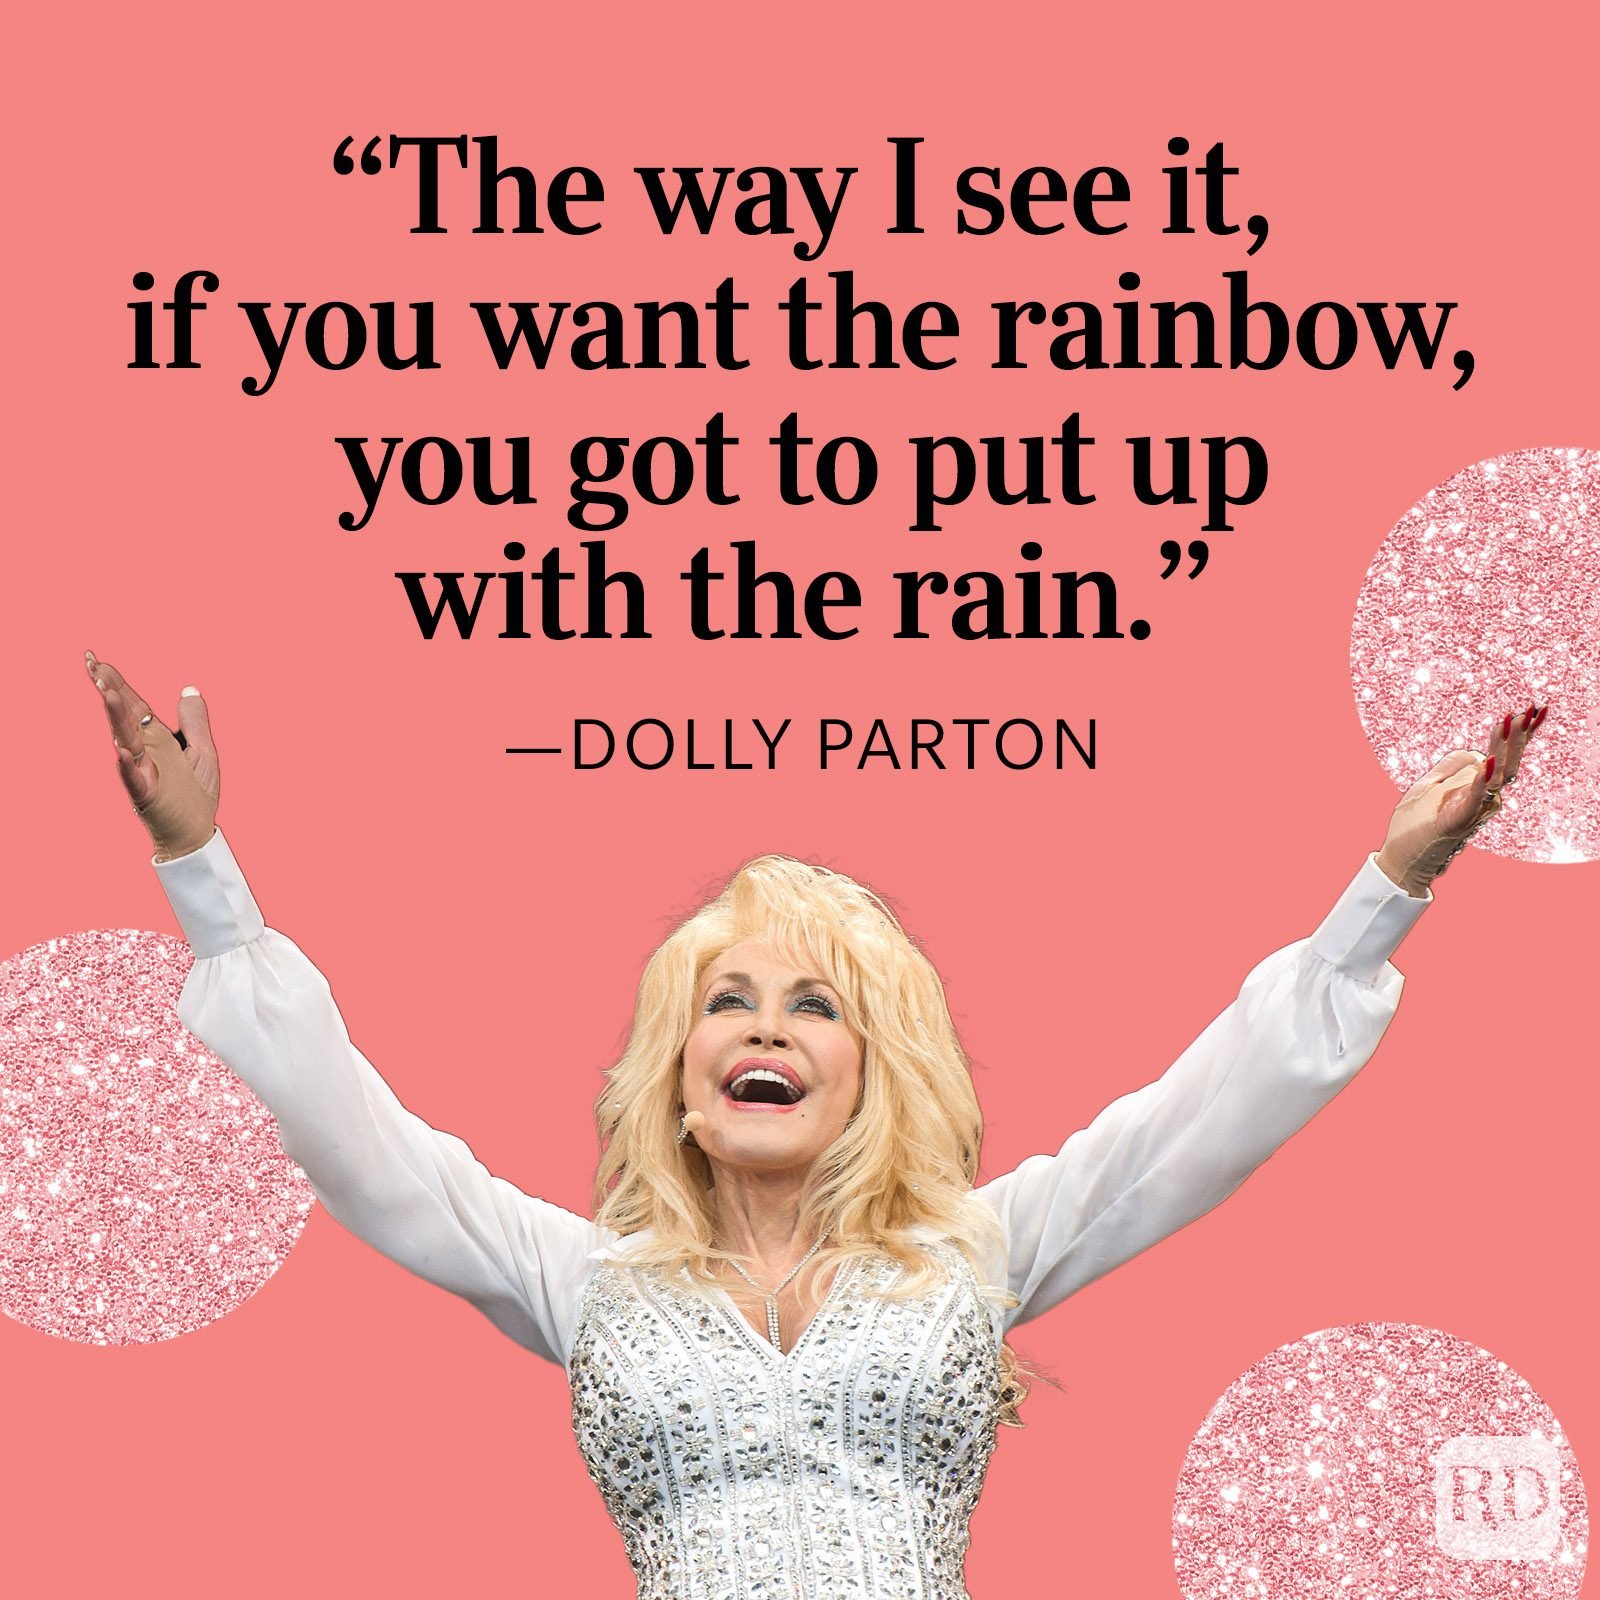 put-up-with-the-rain-dolly-parton-quote.jpg